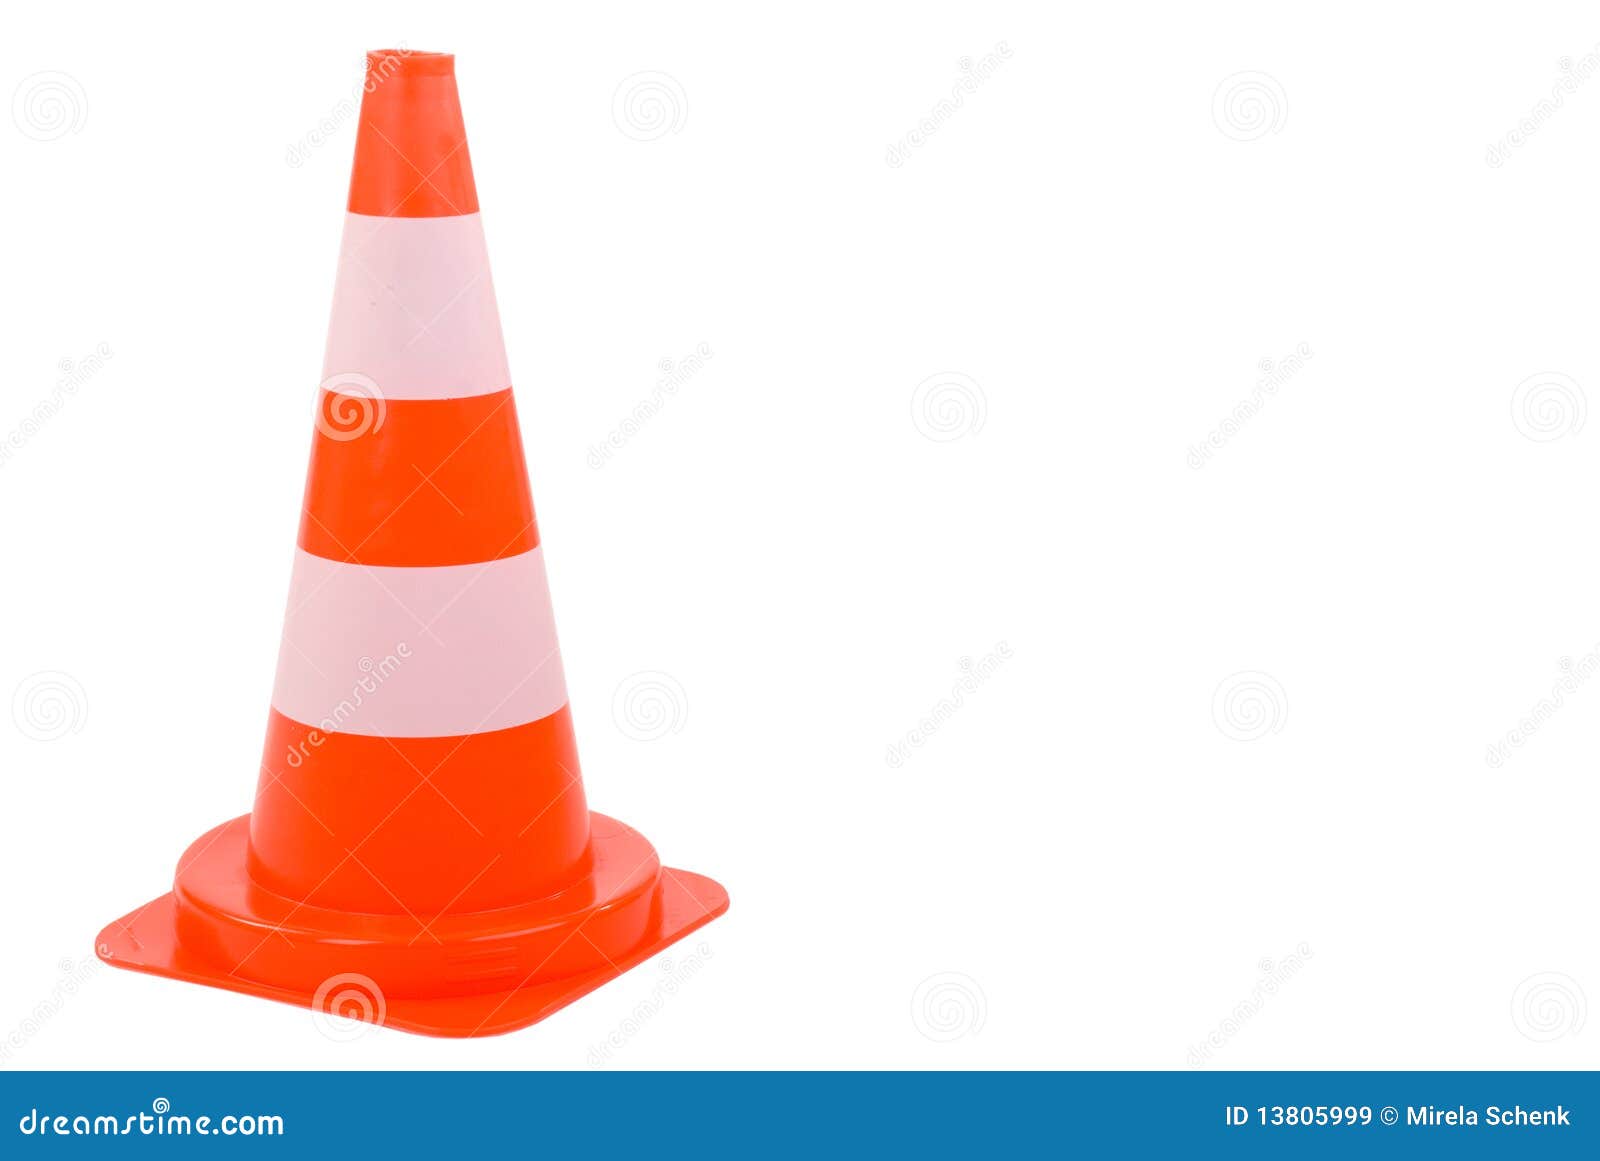 safety cone.